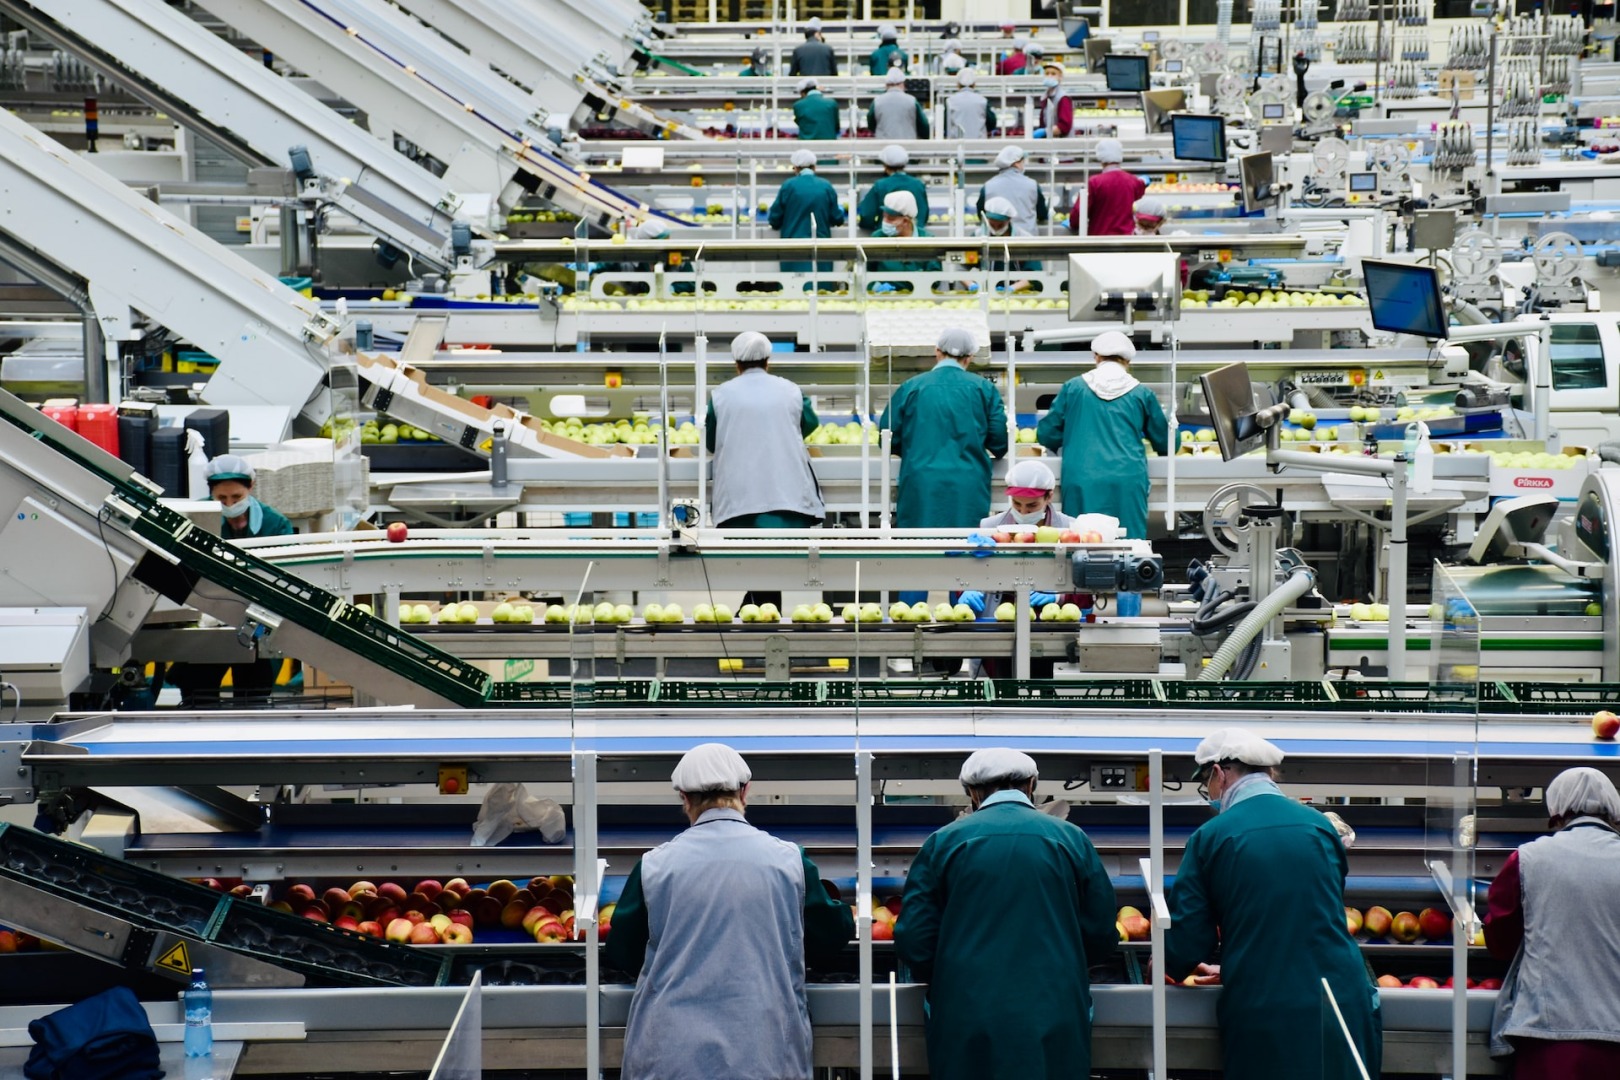 The Top 5 Machines for Automation in the Food Industry